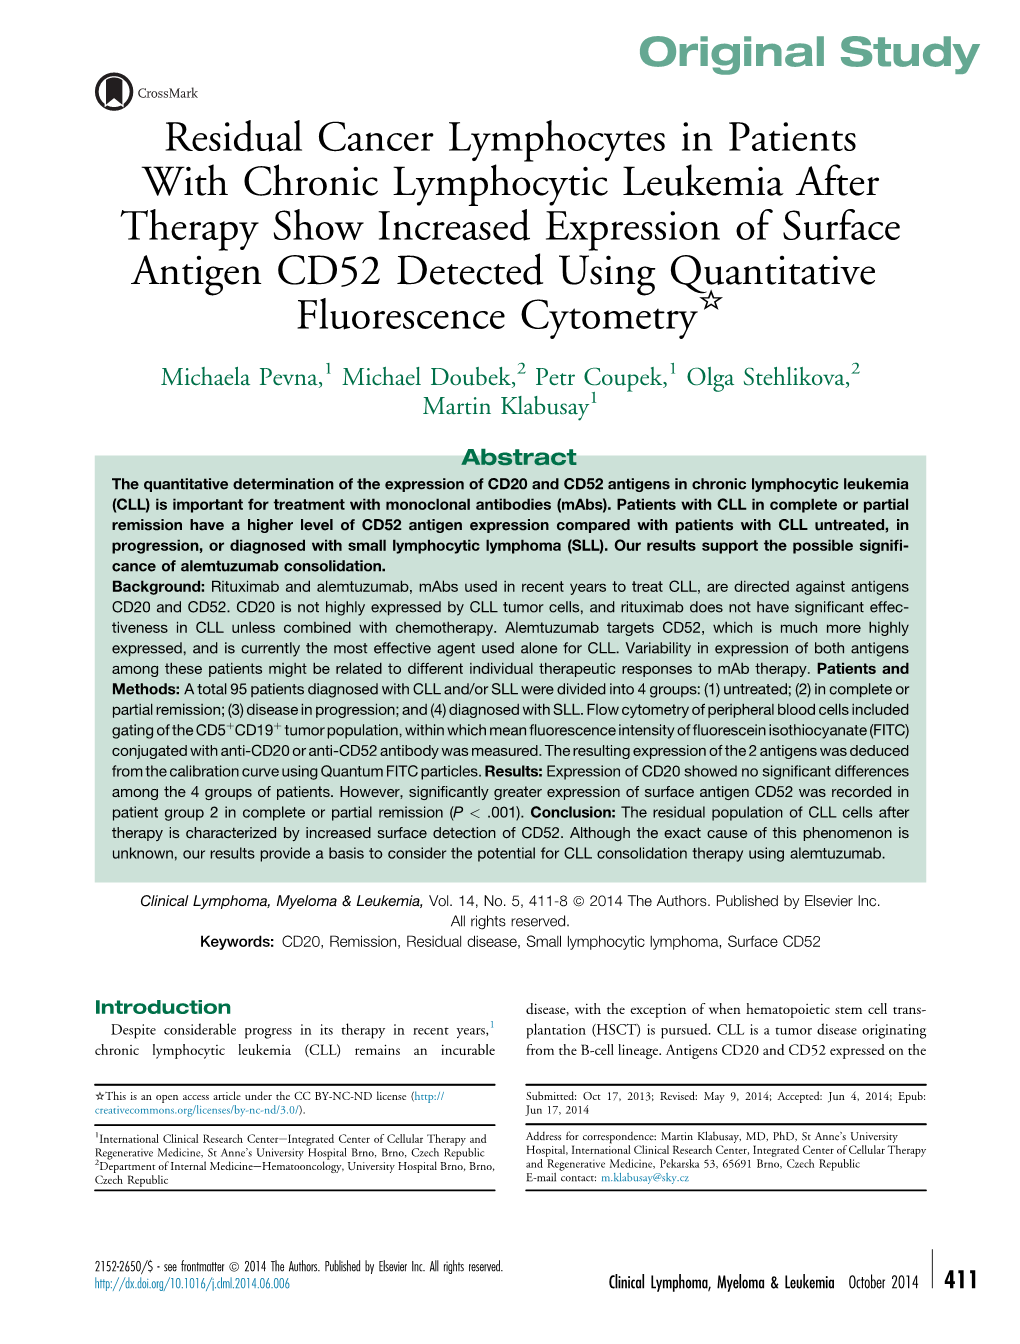 Chronic Lymphocytic Leukemia After Therapy Show Increased Expression of Surface